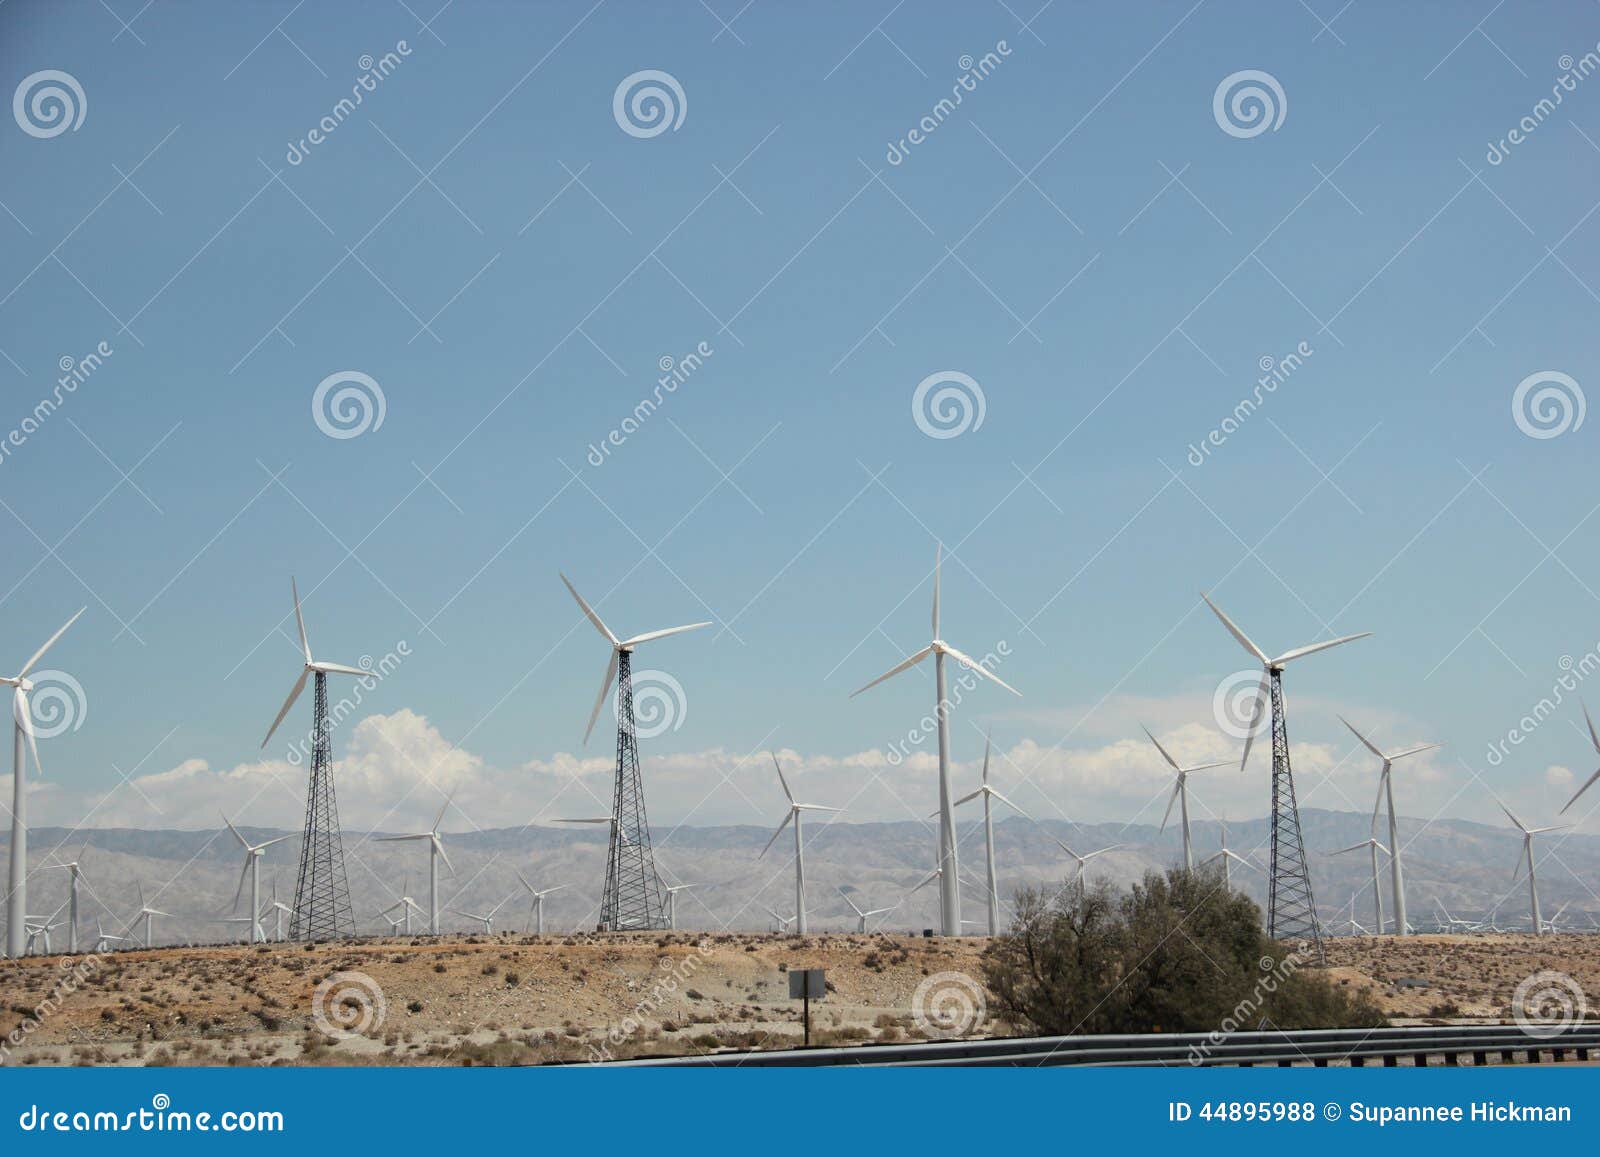 Windmill Generating Electricity for People in Southern California.